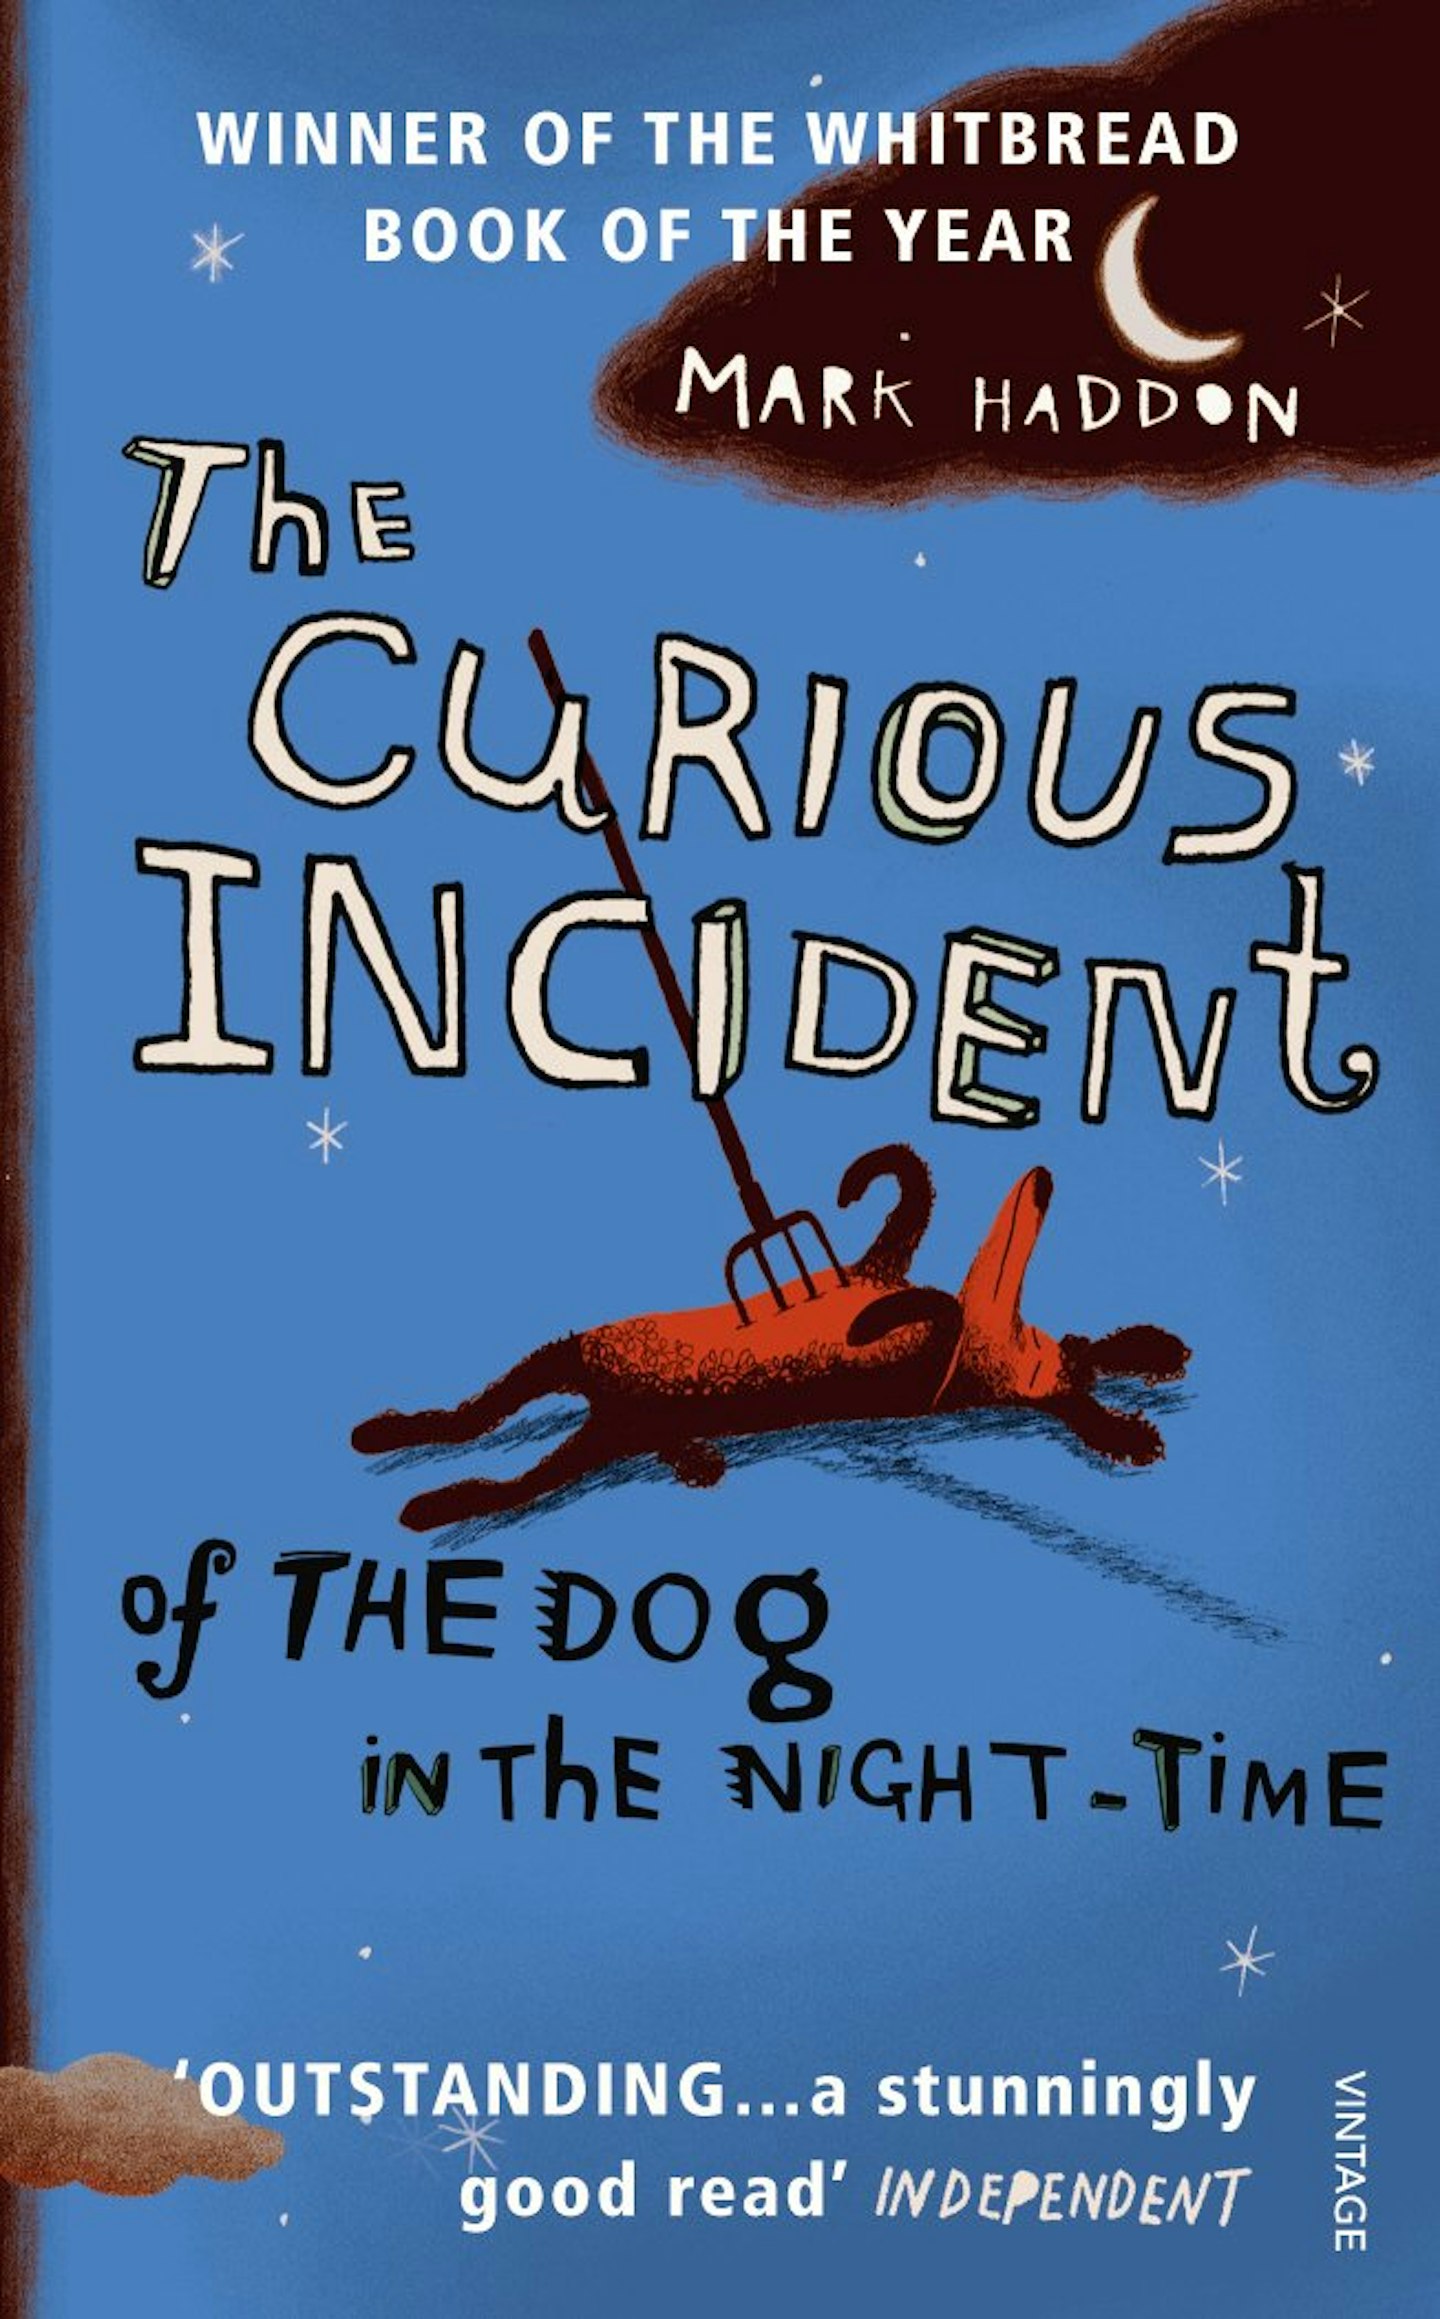 The Curious Incident of the Dog in the Night-time by Mark Haddon, 7.15